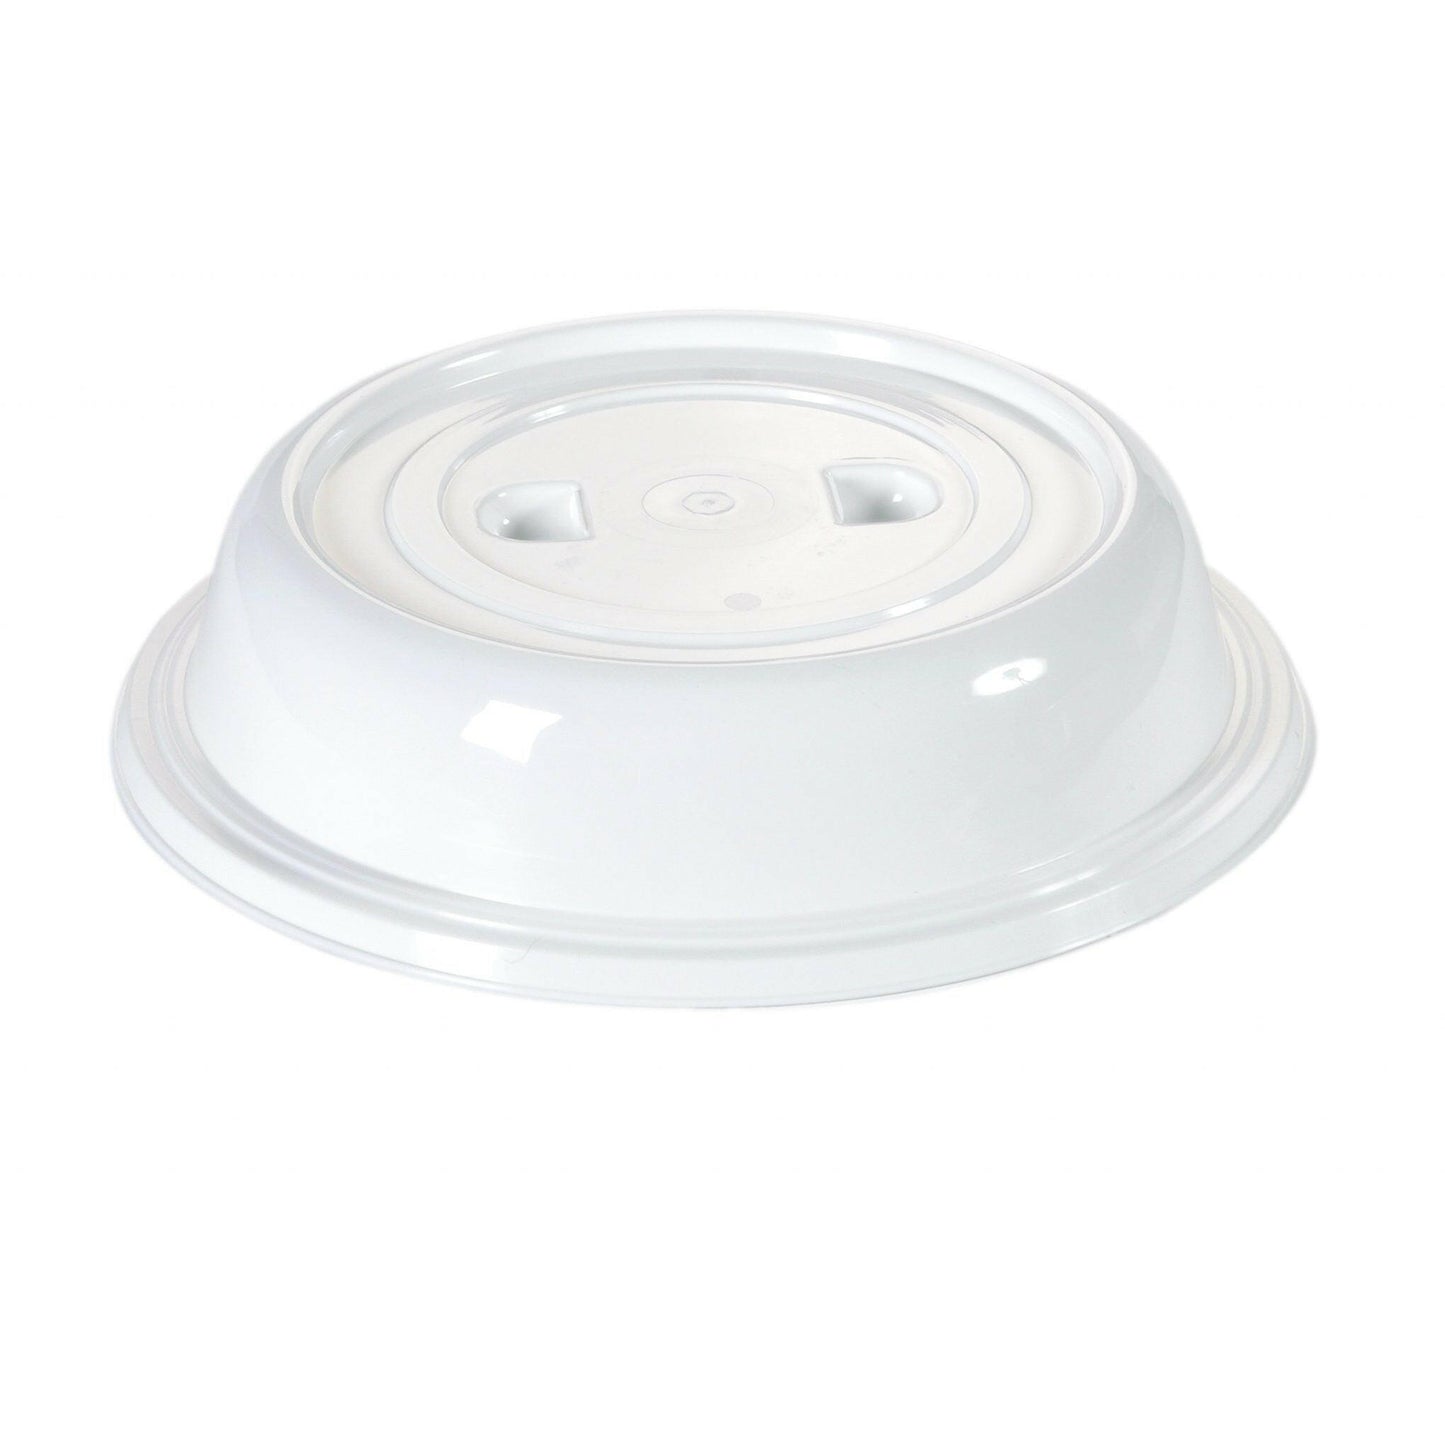 Foodservice Large Polycarbonate White Plate Cover 25.9cm